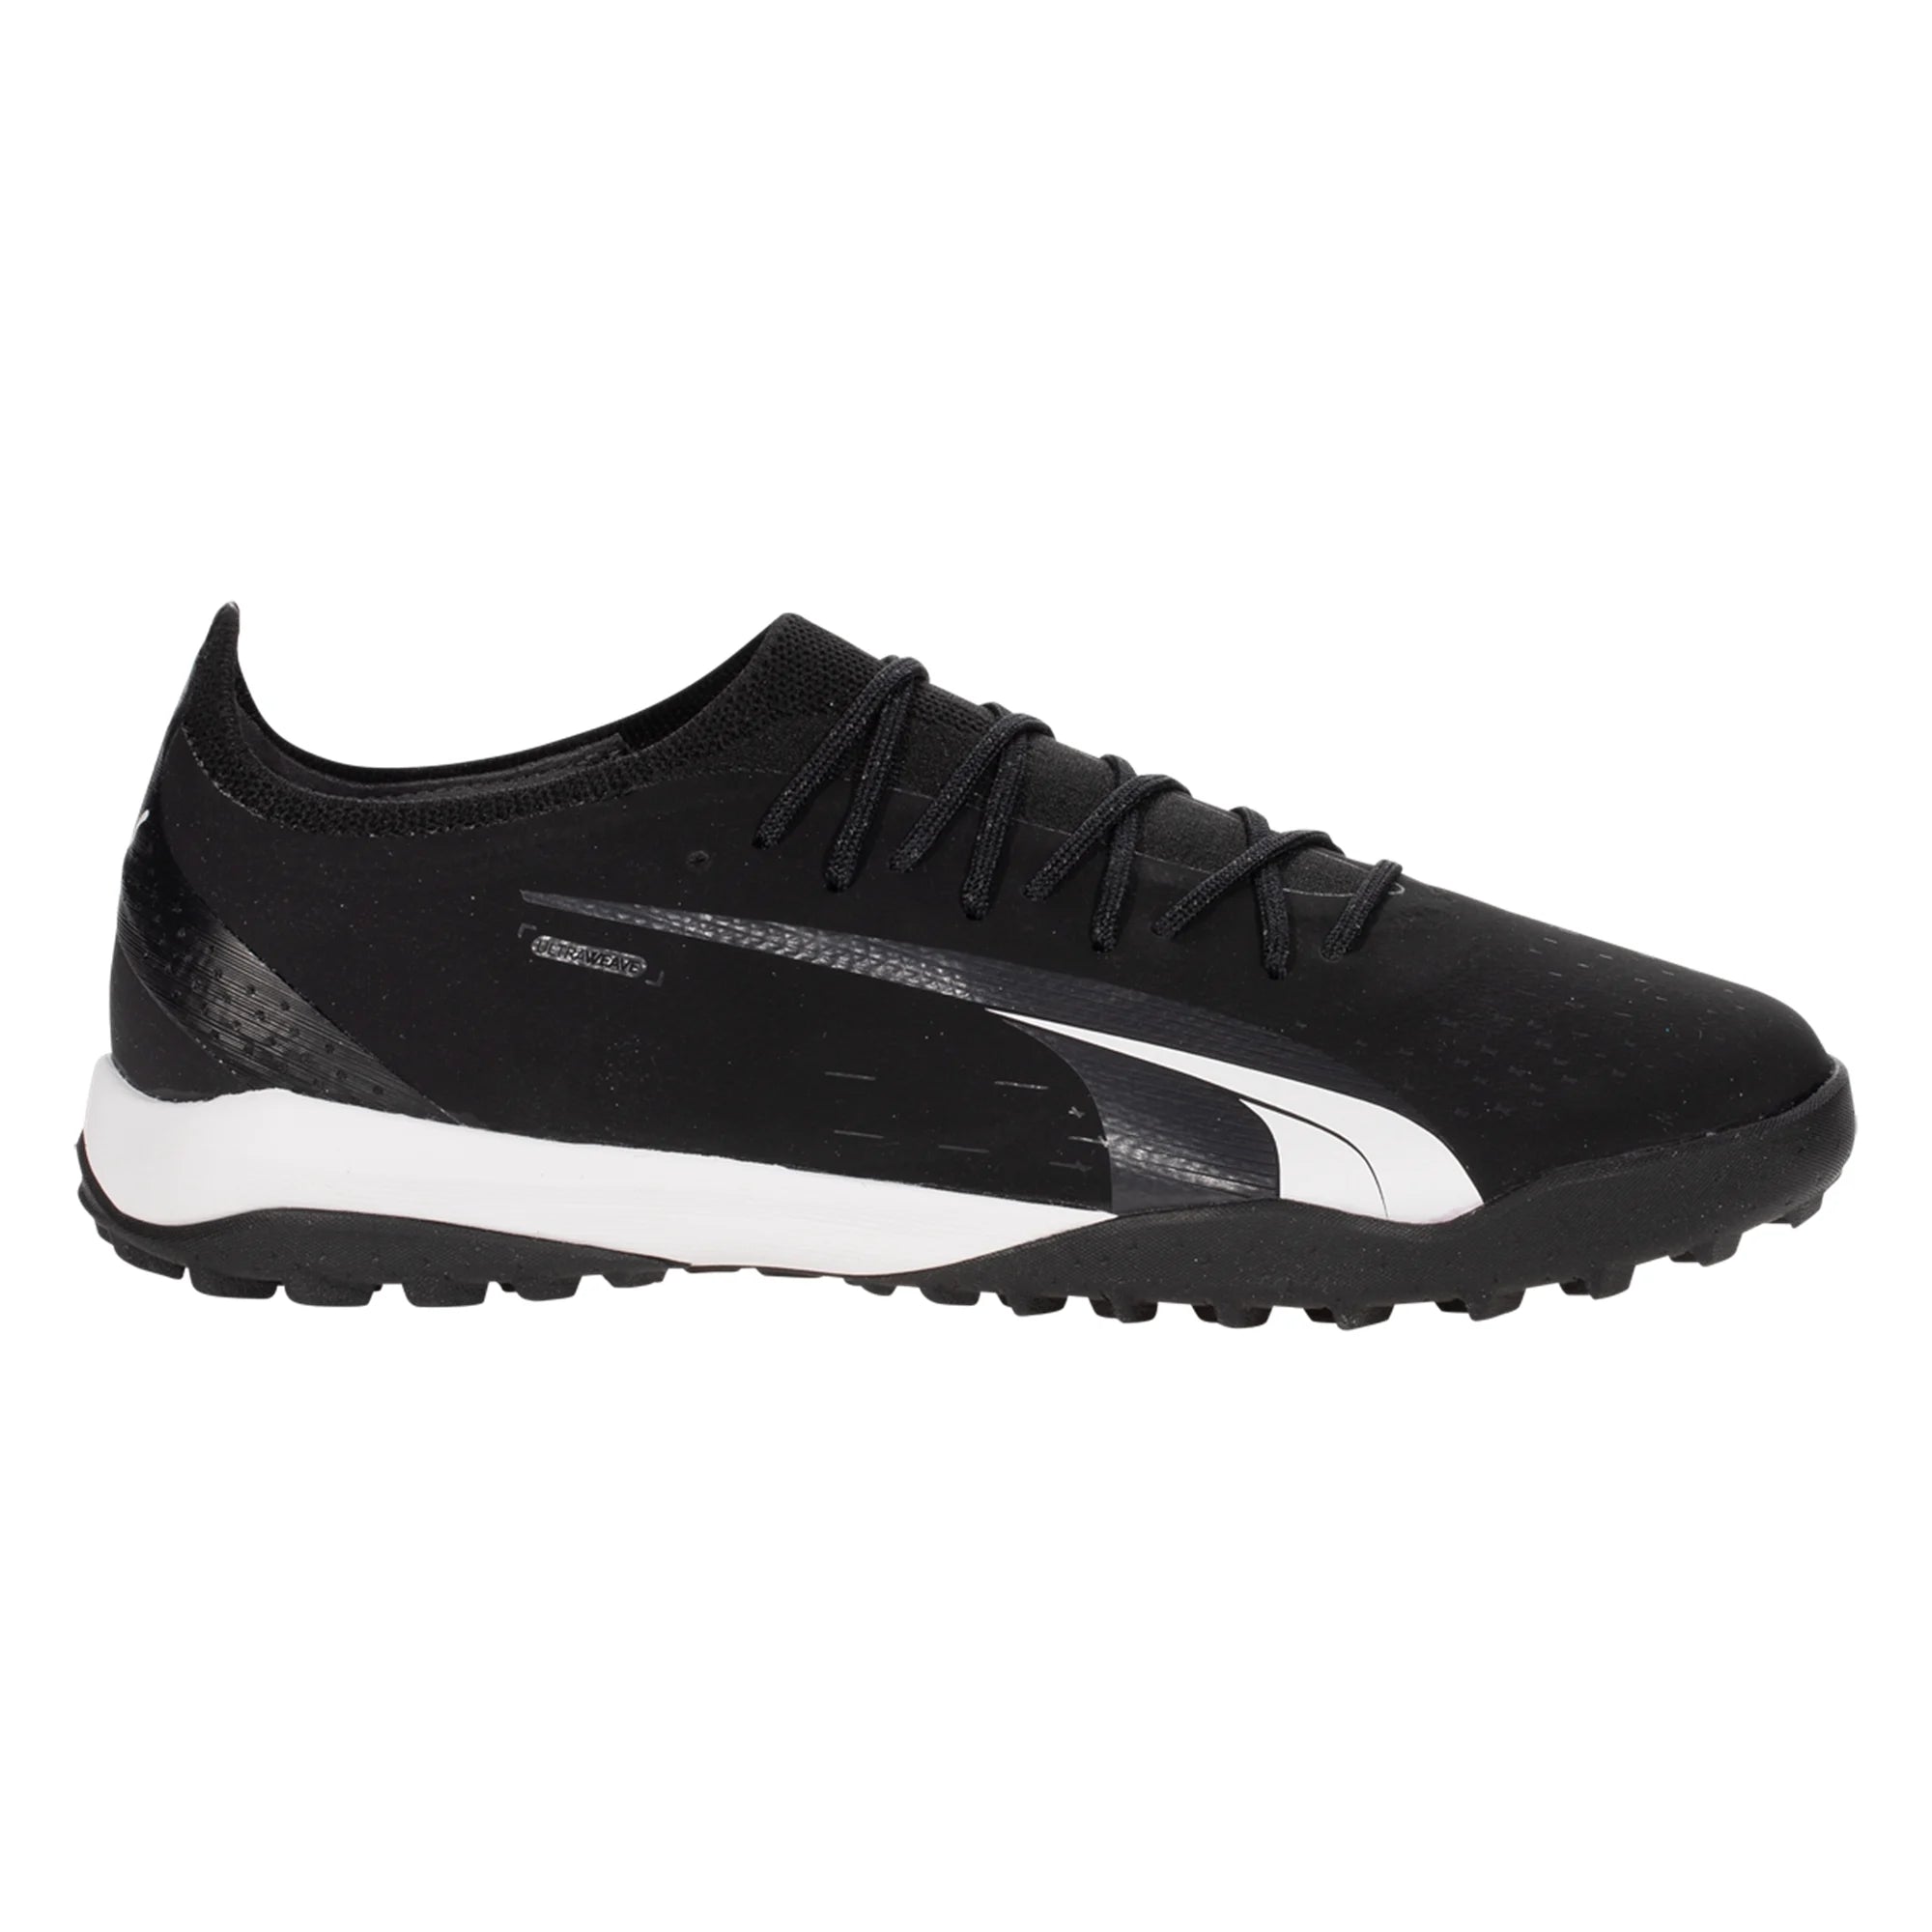 Puma Ultra Ultimate Cage Turf Soccer Cleats - Black/White 107210